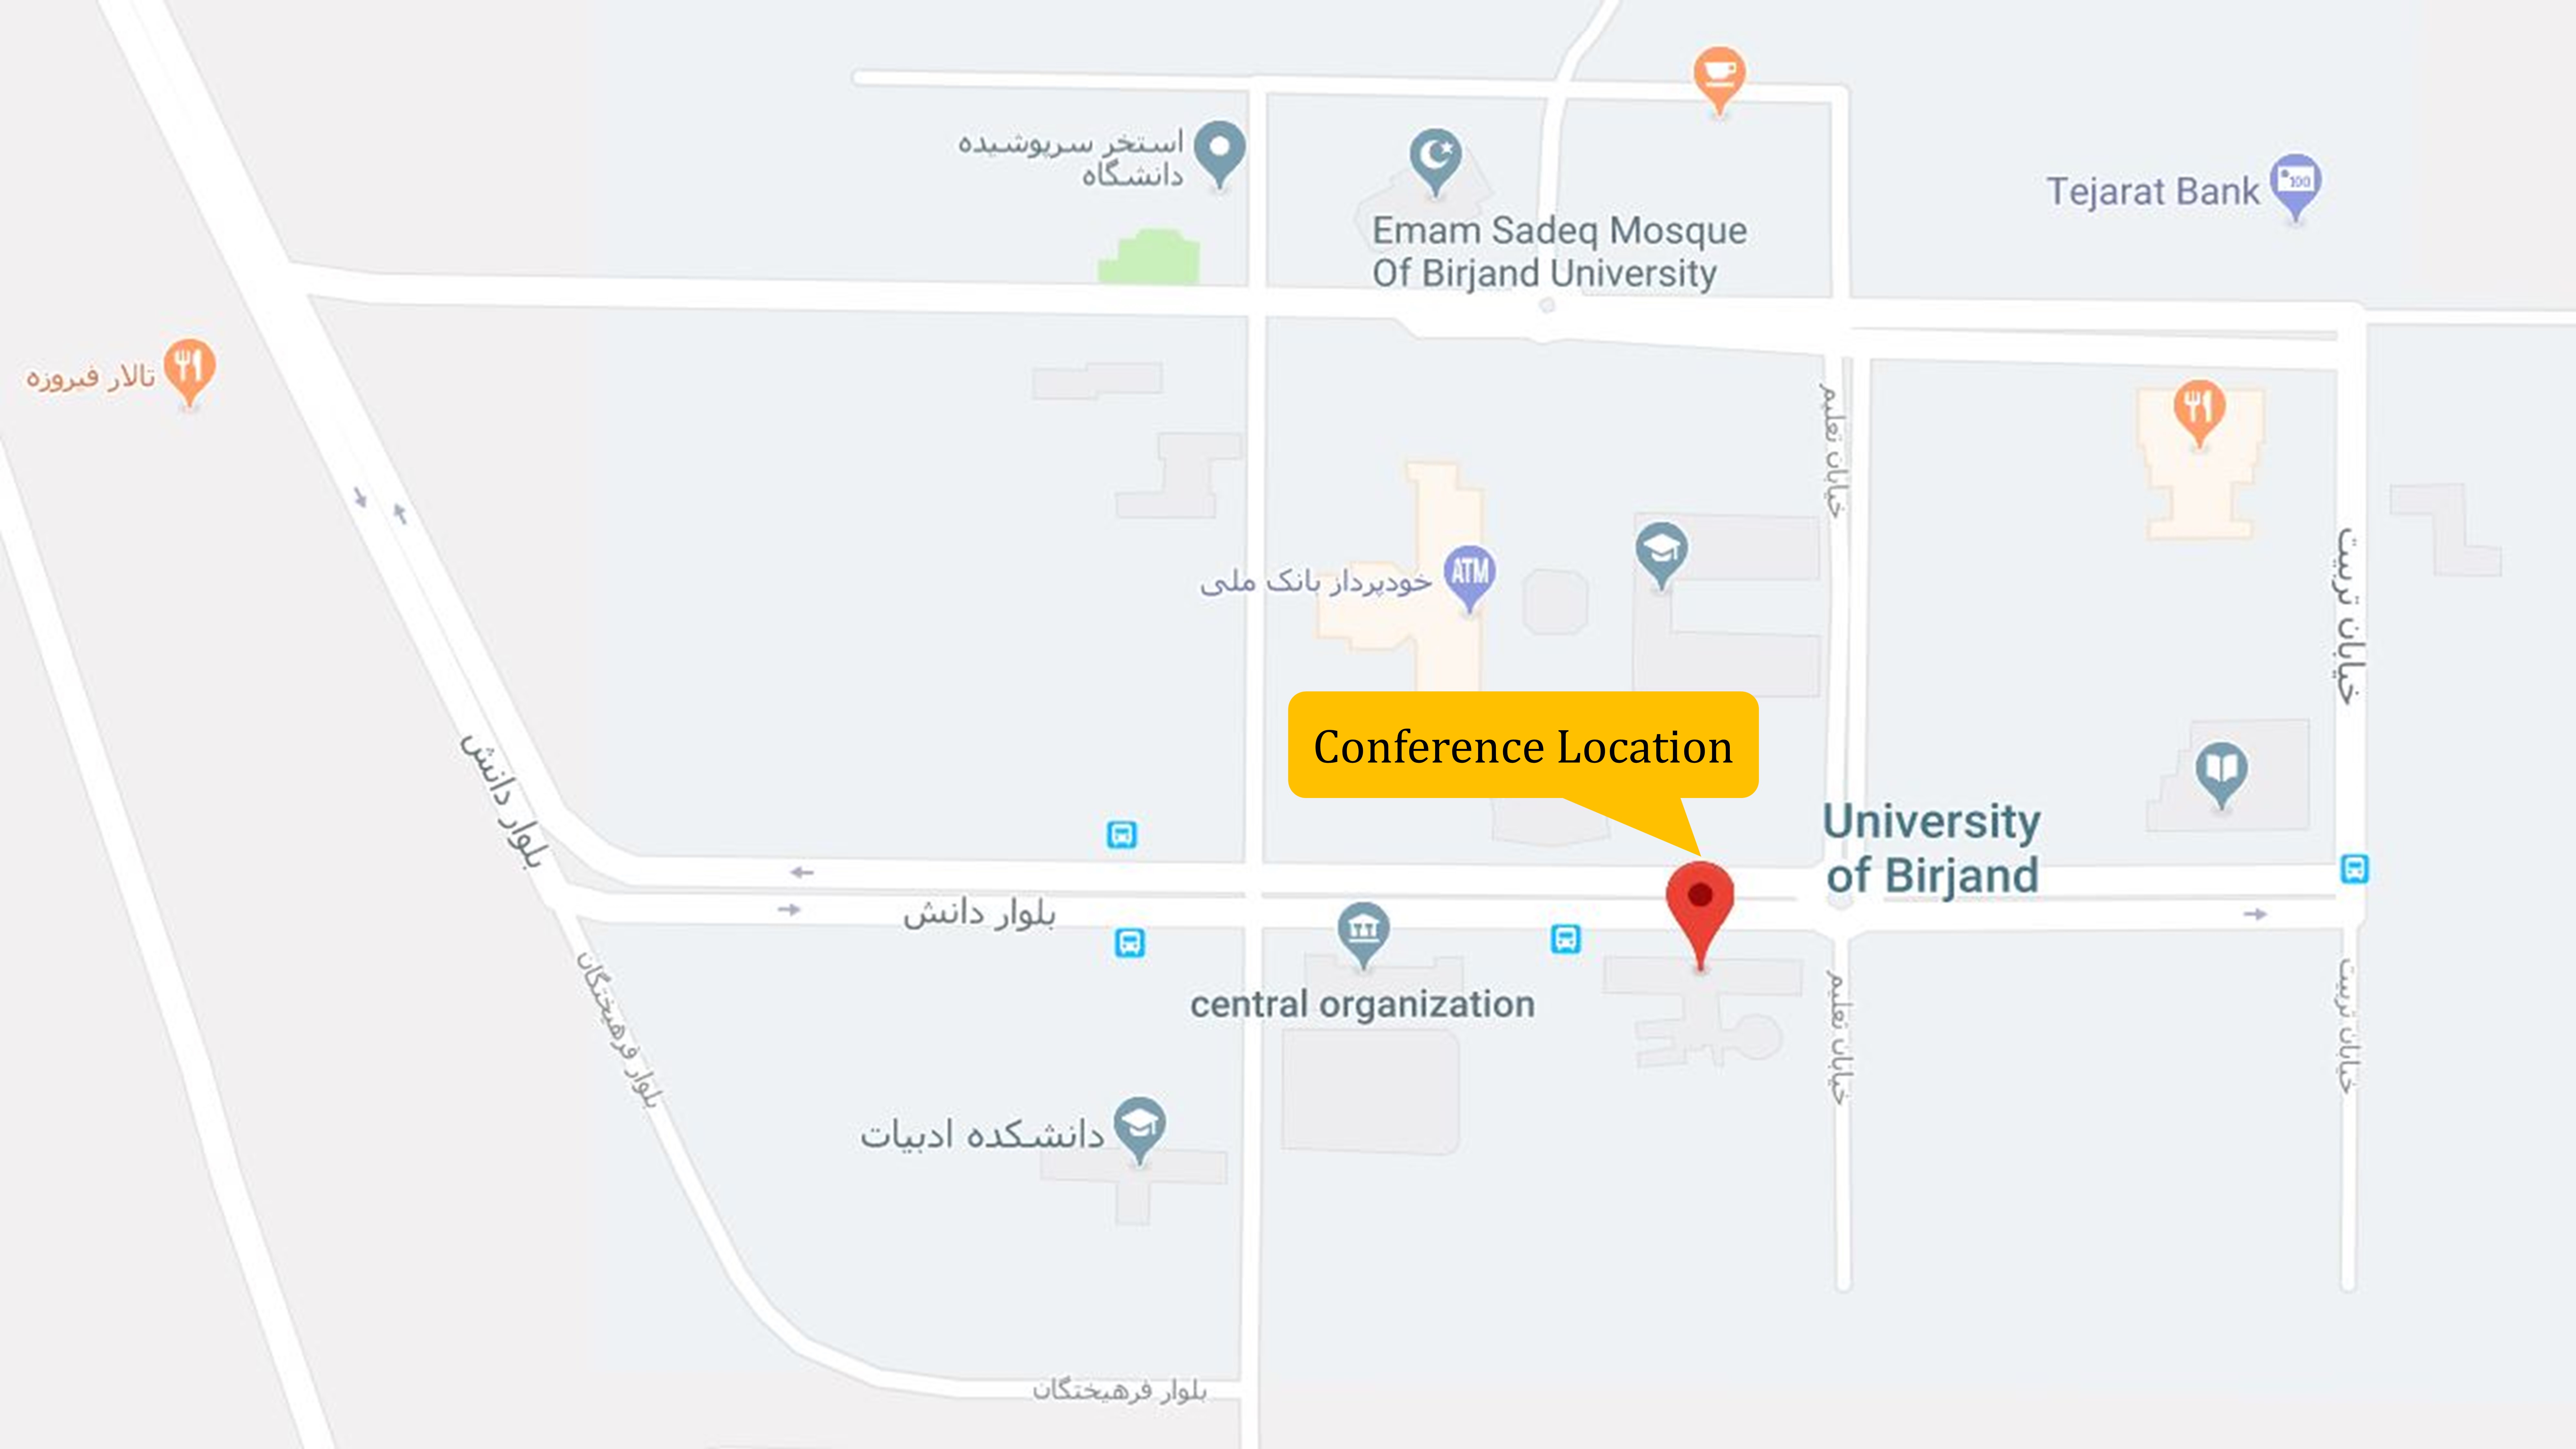 Conference Location